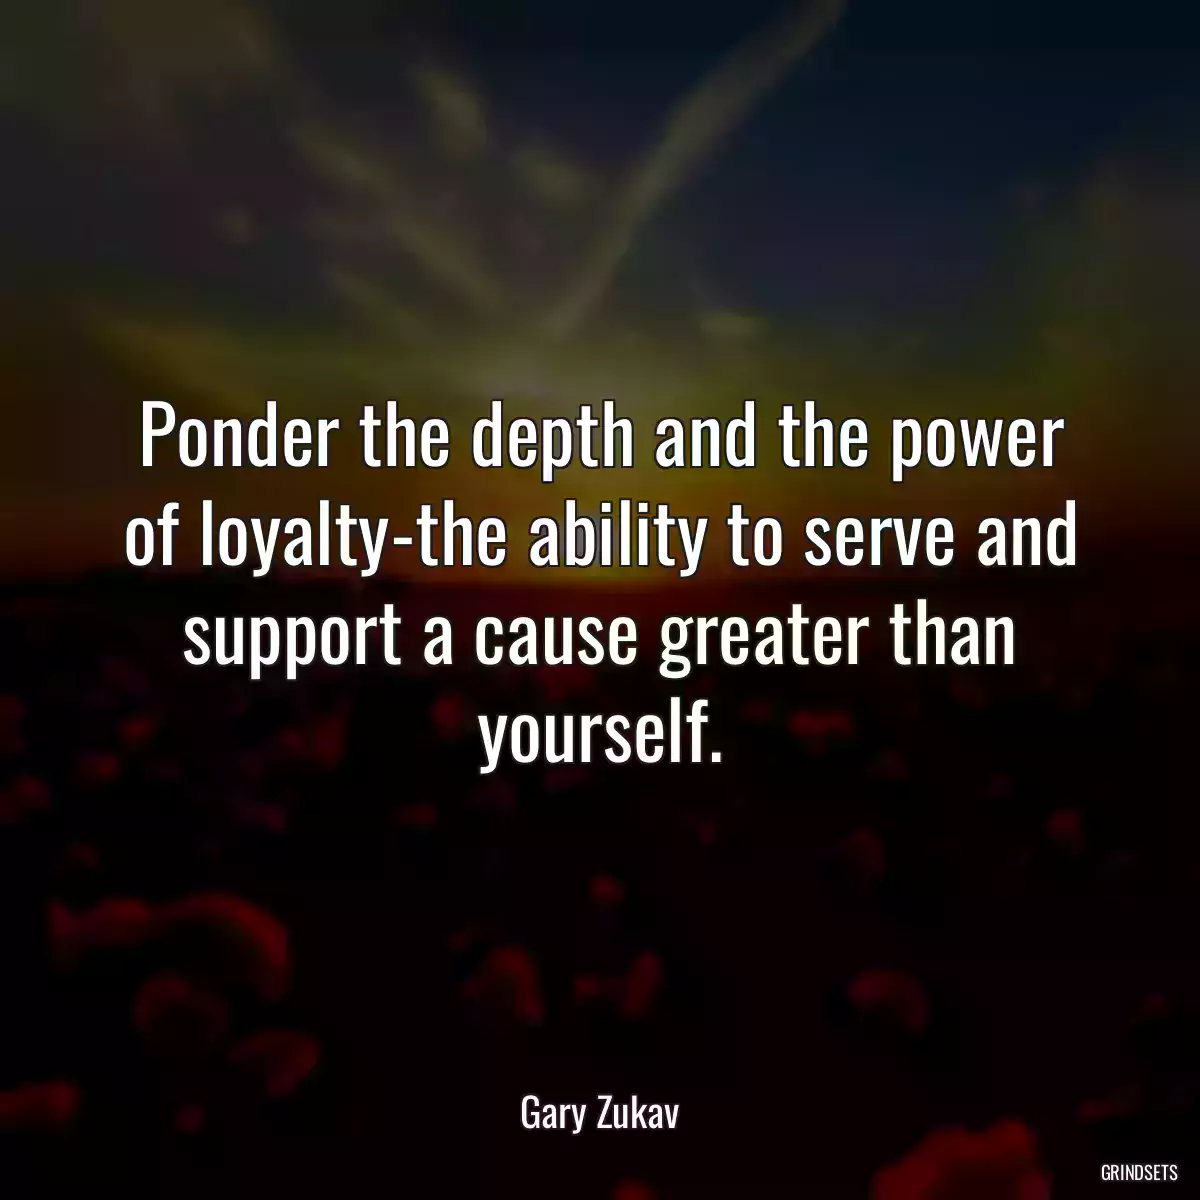 Ponder the depth and the power of loyalty-the ability to serve and support a cause greater than yourself.